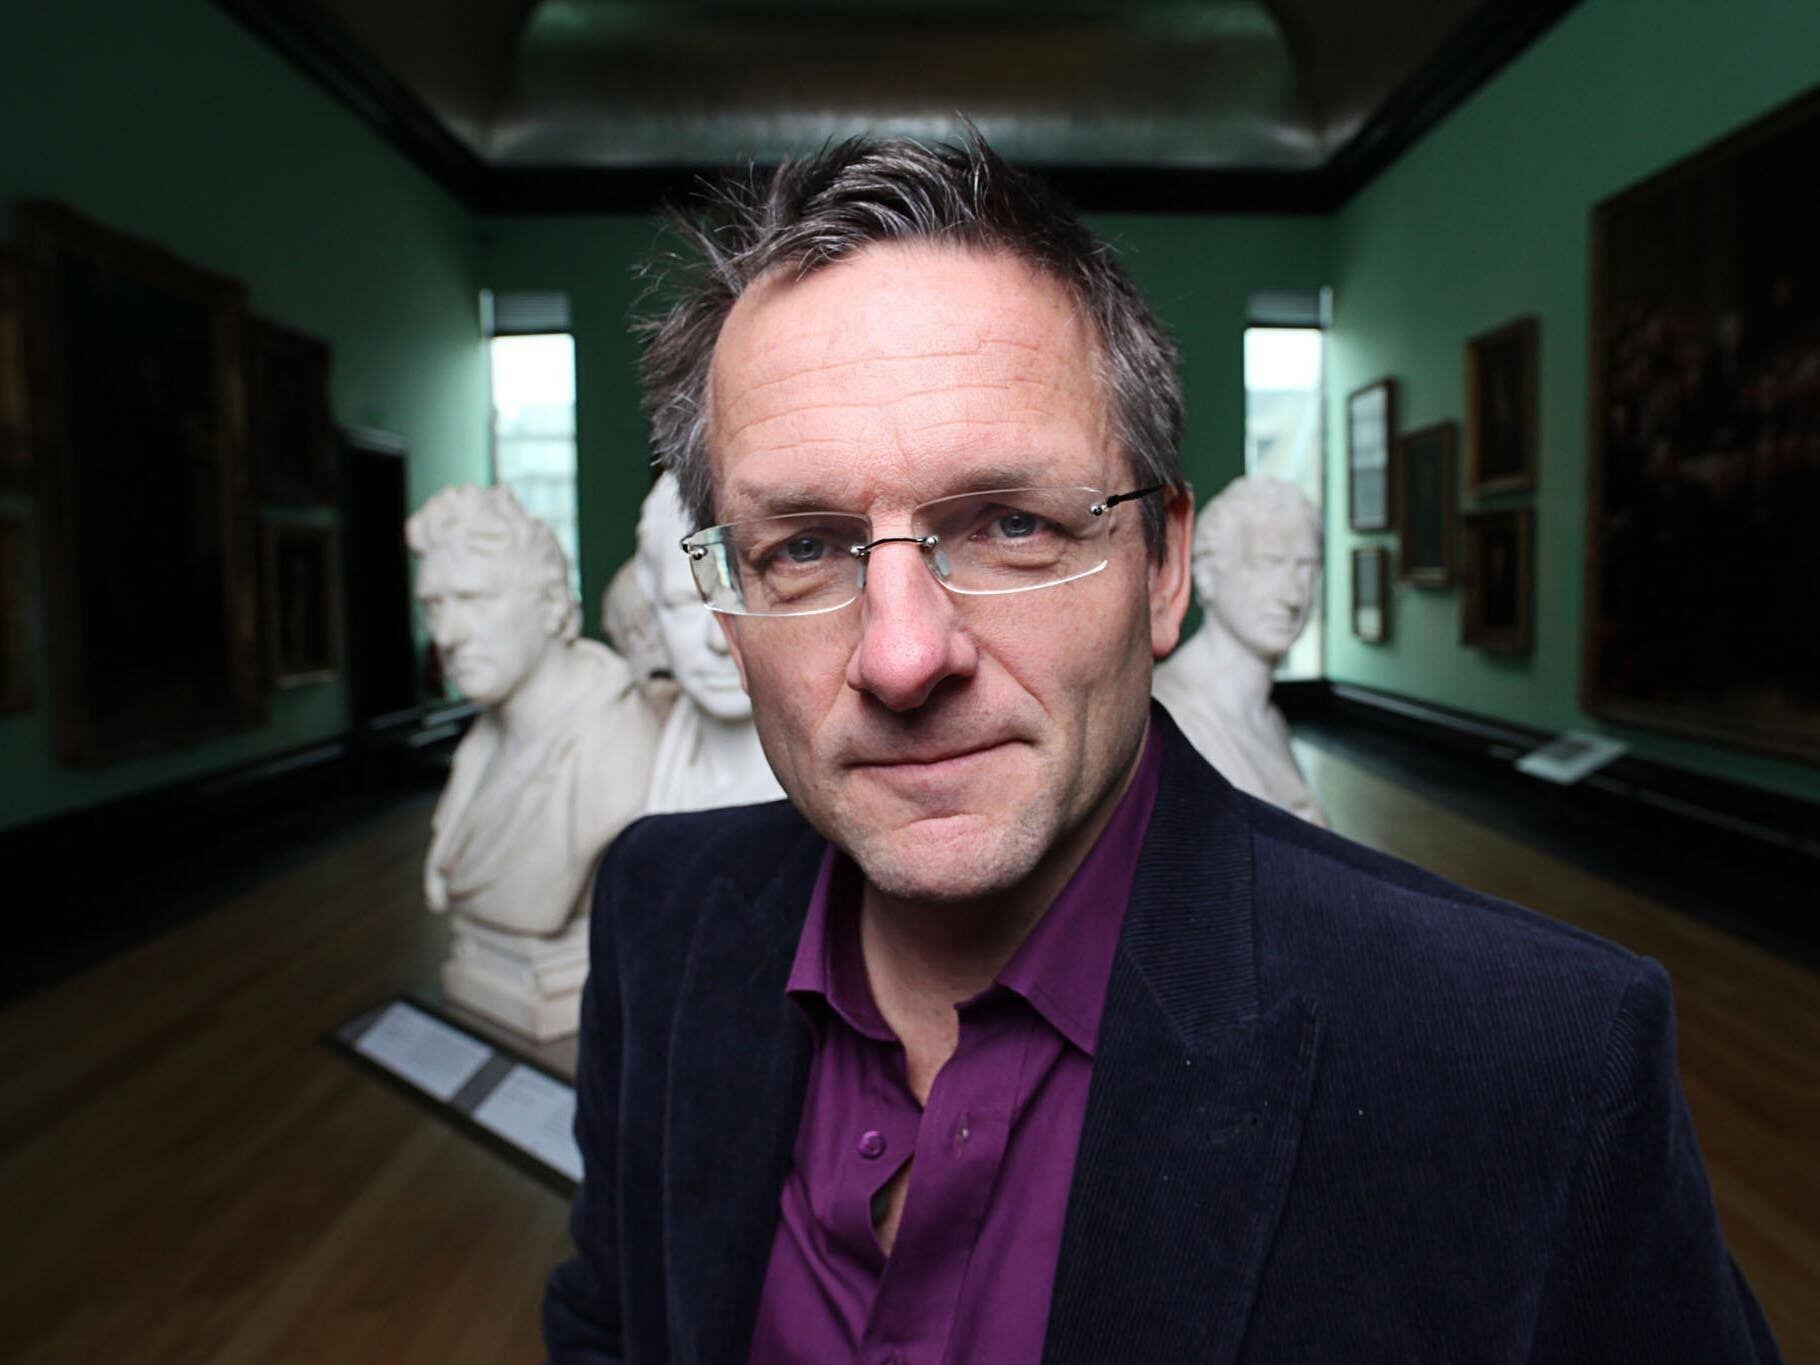 BBC reflects on career of Michael Mosley who ‘demystified science’ for nation